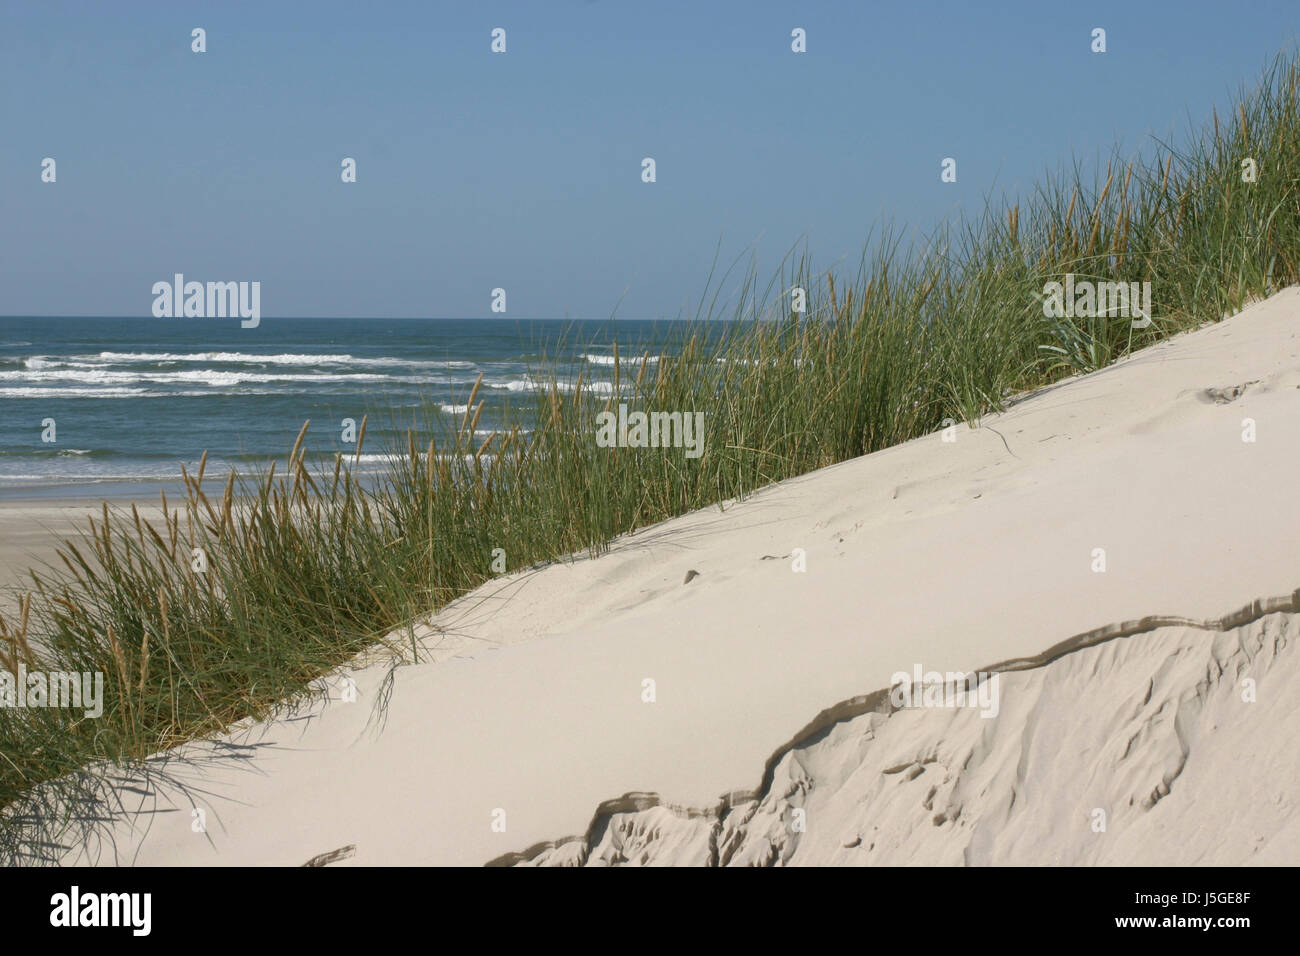 dune with sea in the background Stock Photo